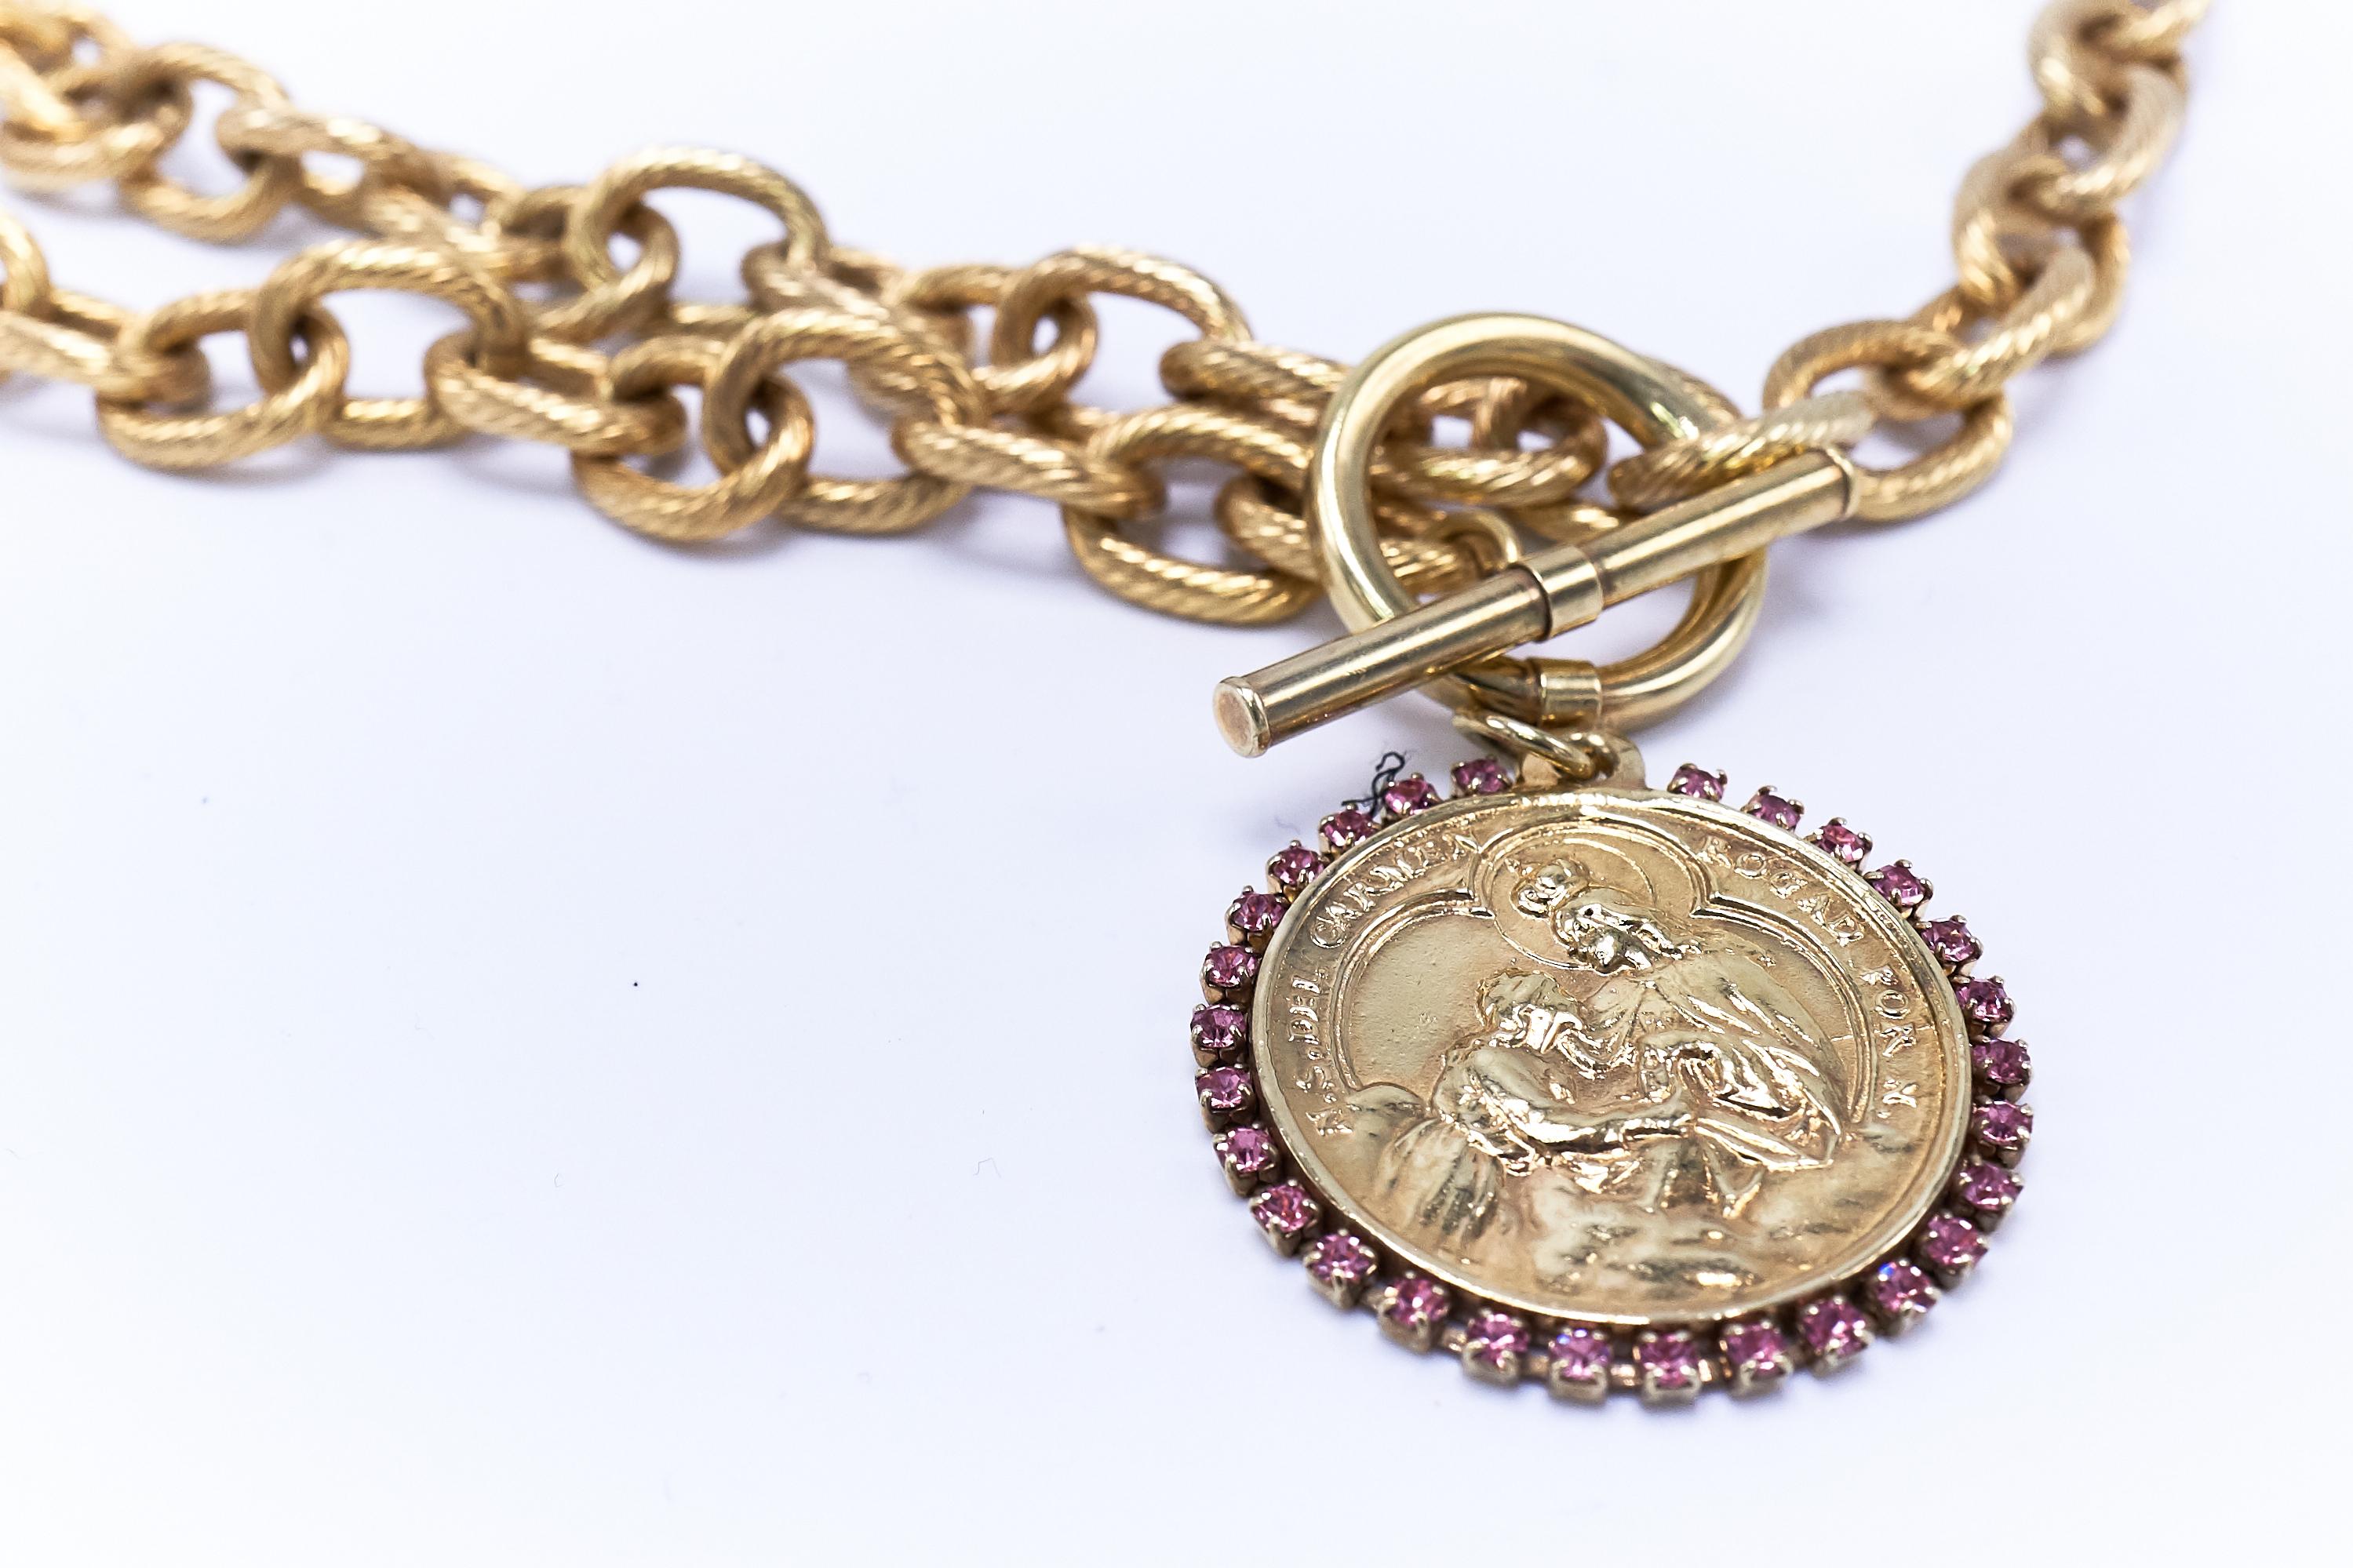 Chunky Chain Choker Necklace Medal Rhinestone Gold Plated Pendant J Dauphin

J DAUPHIN necklace 